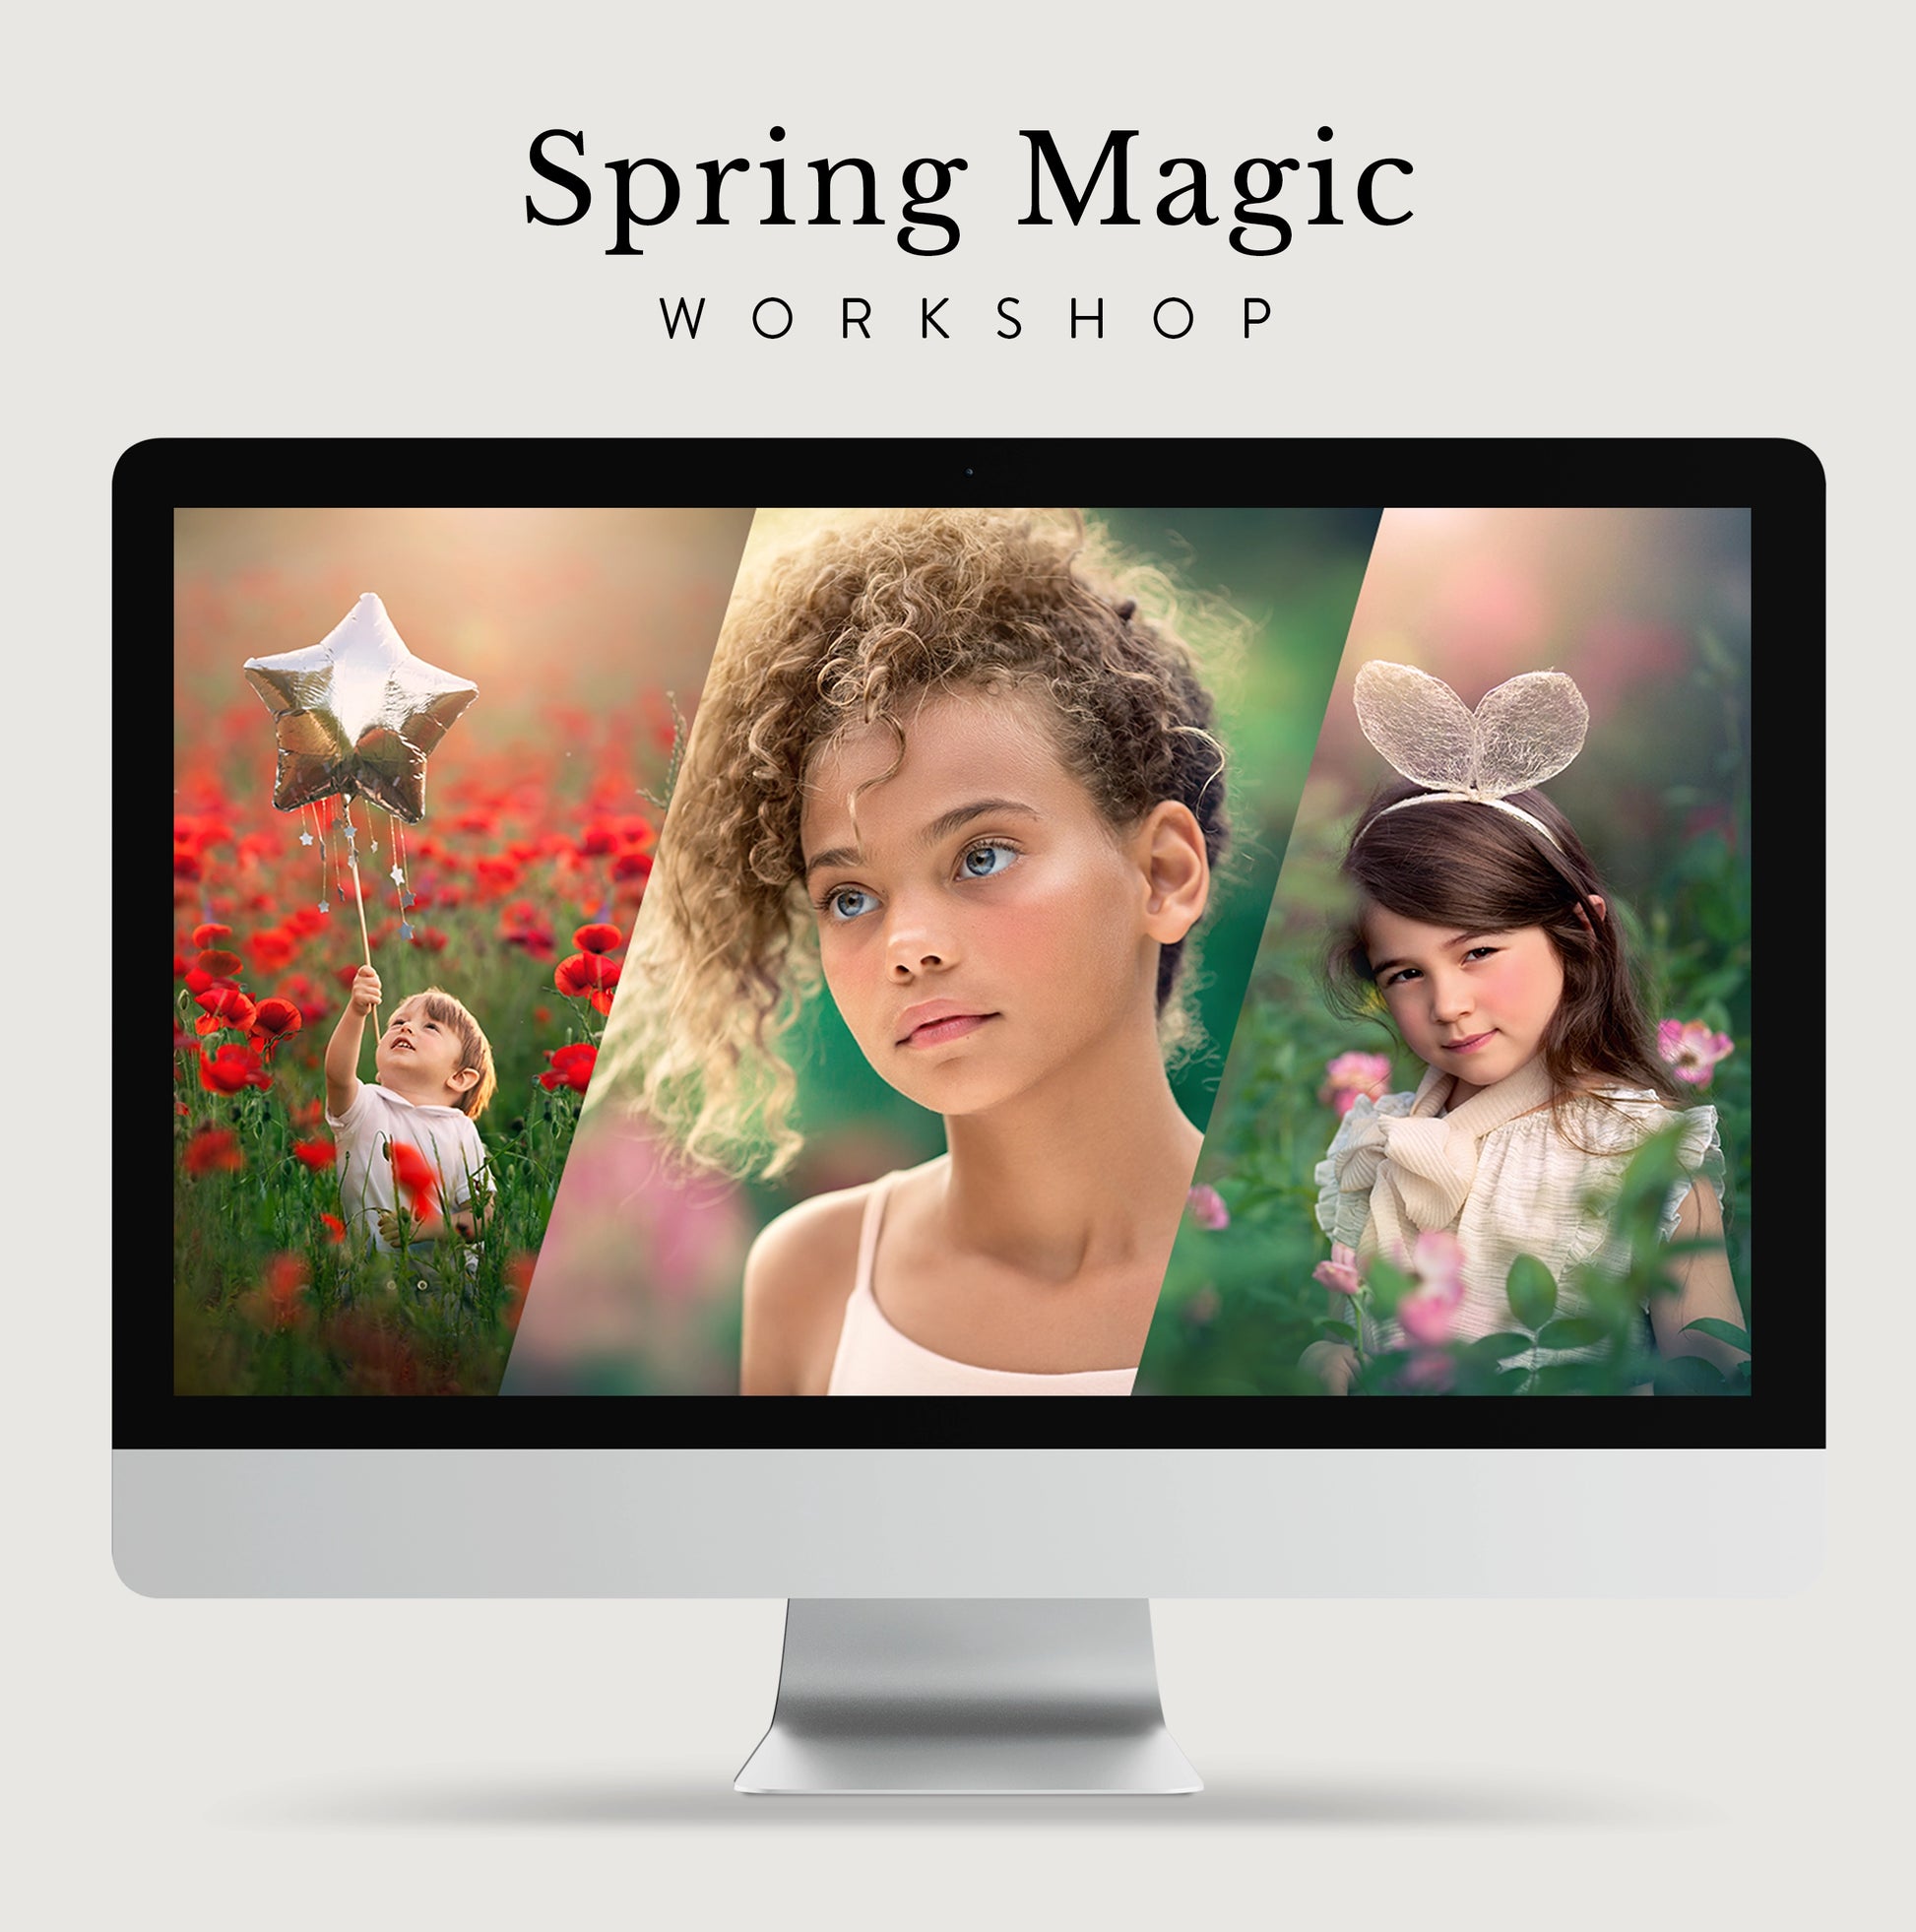 Spring photos editing course for photographers